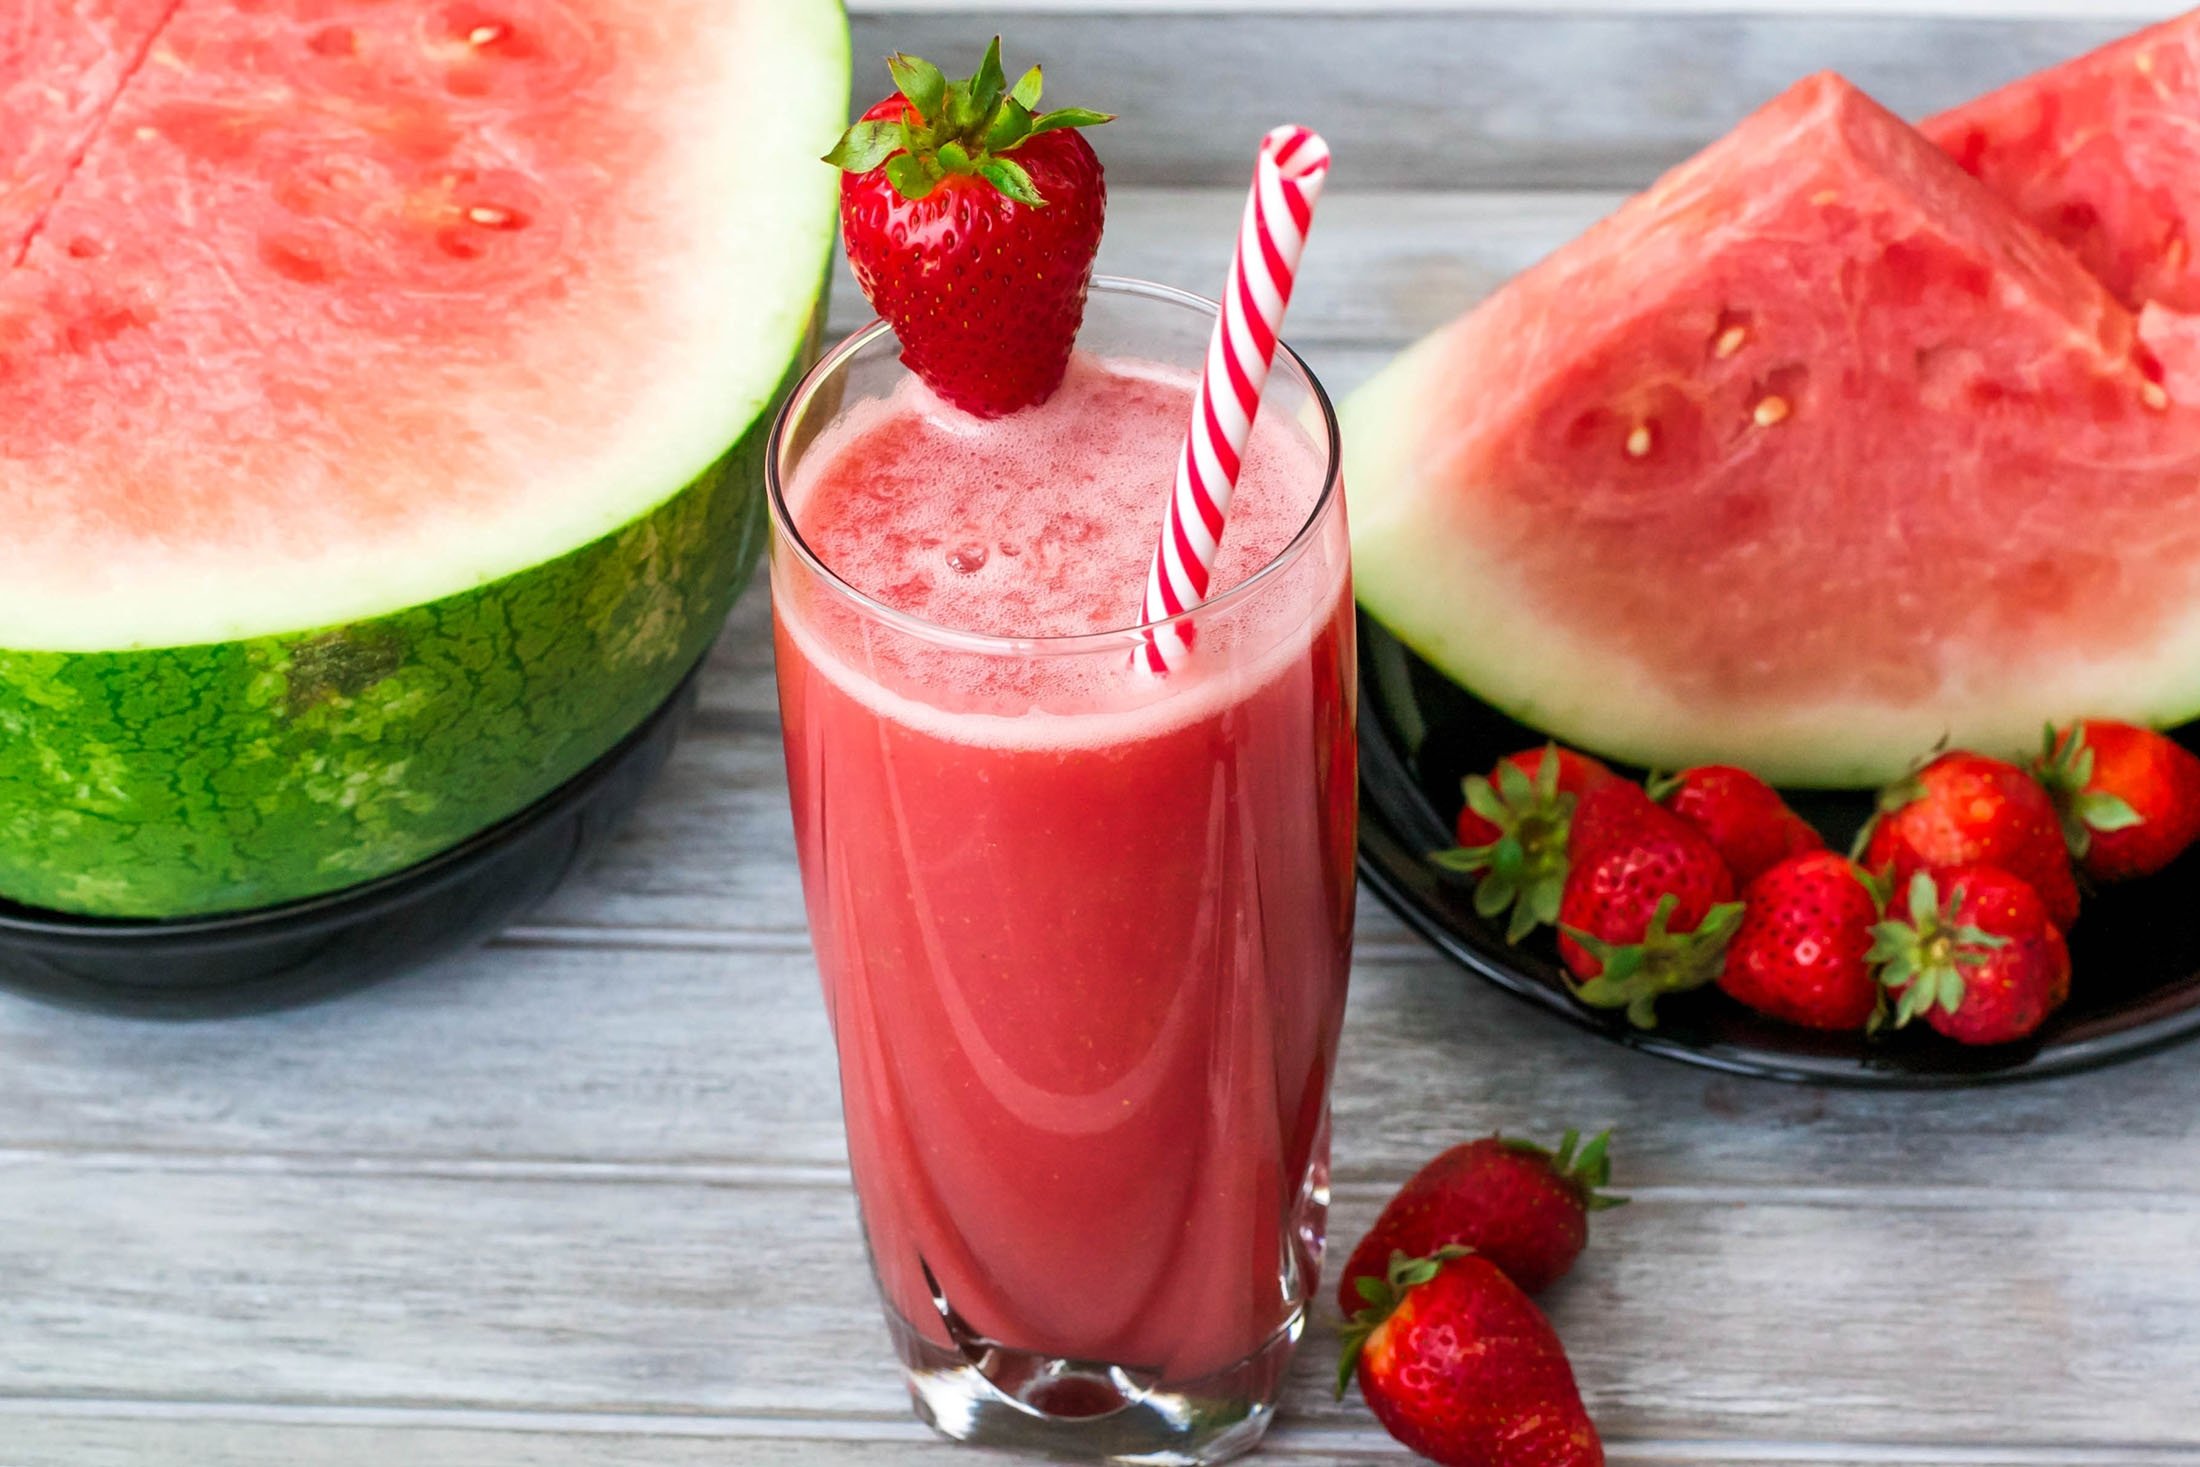 Watermelons are not just good for eating but also making beverages, especially with strawberry. (Shutterstock Photo)